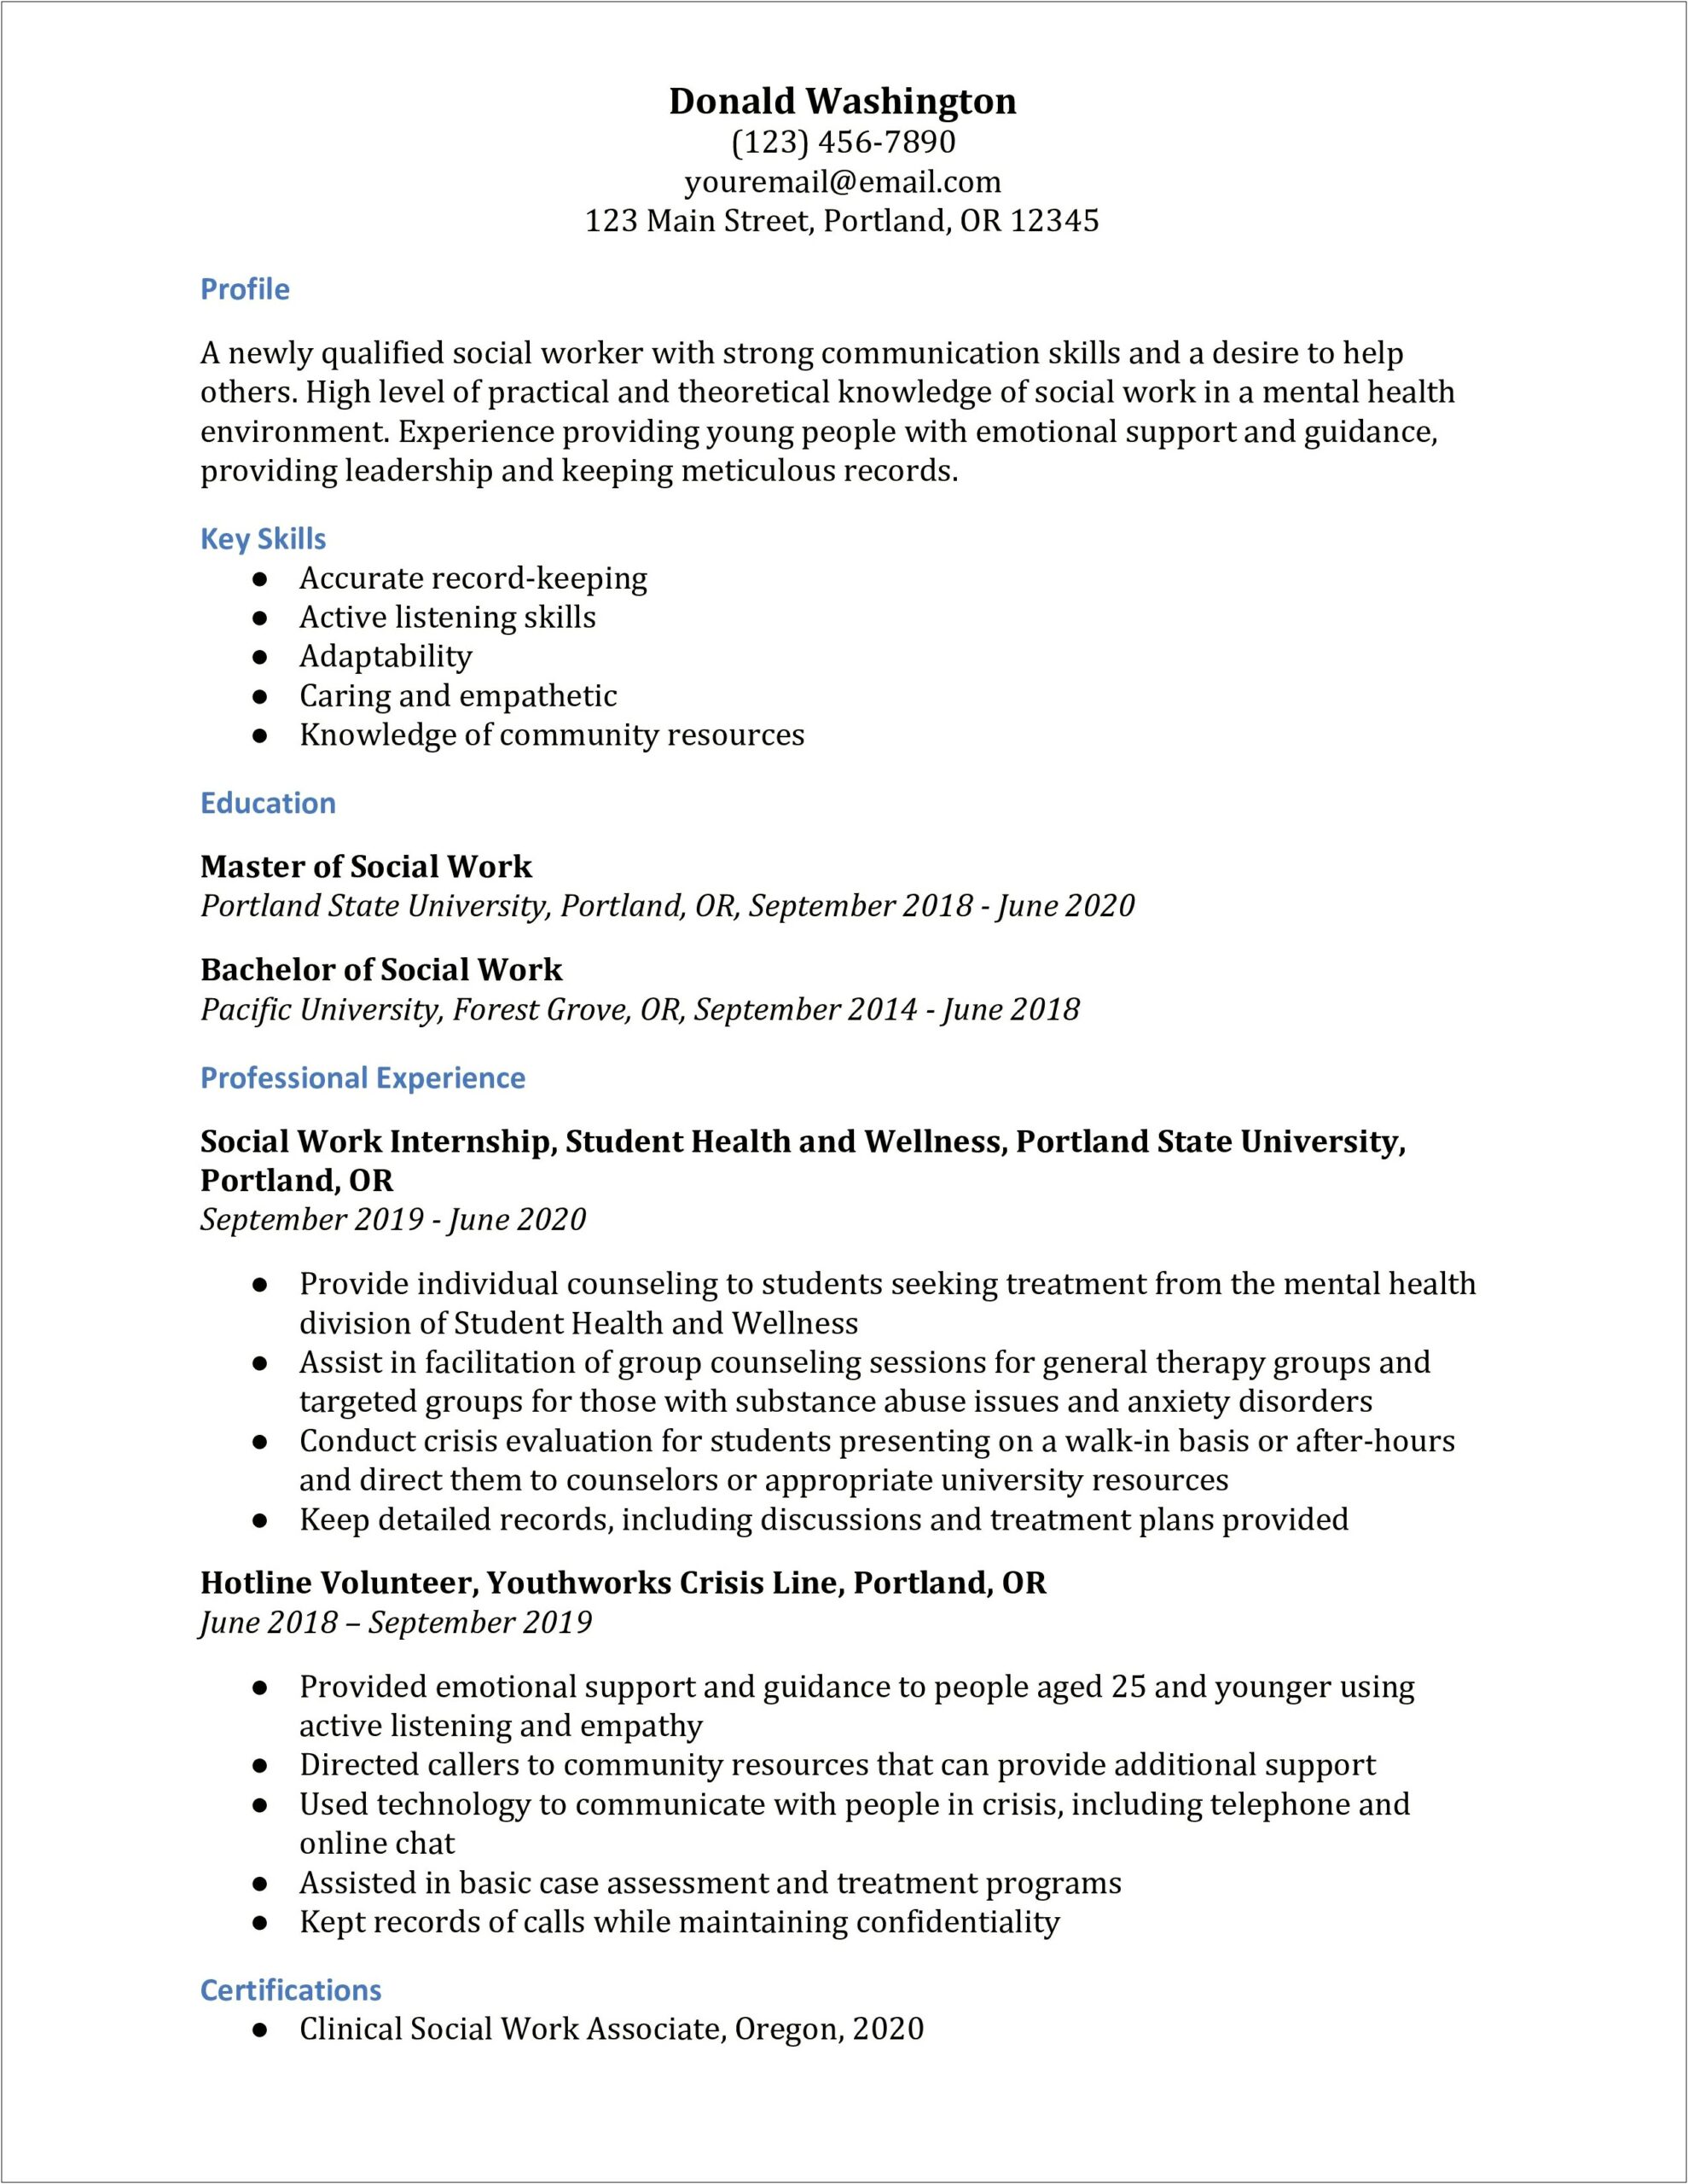 Resume Example For Applying To Msw Program